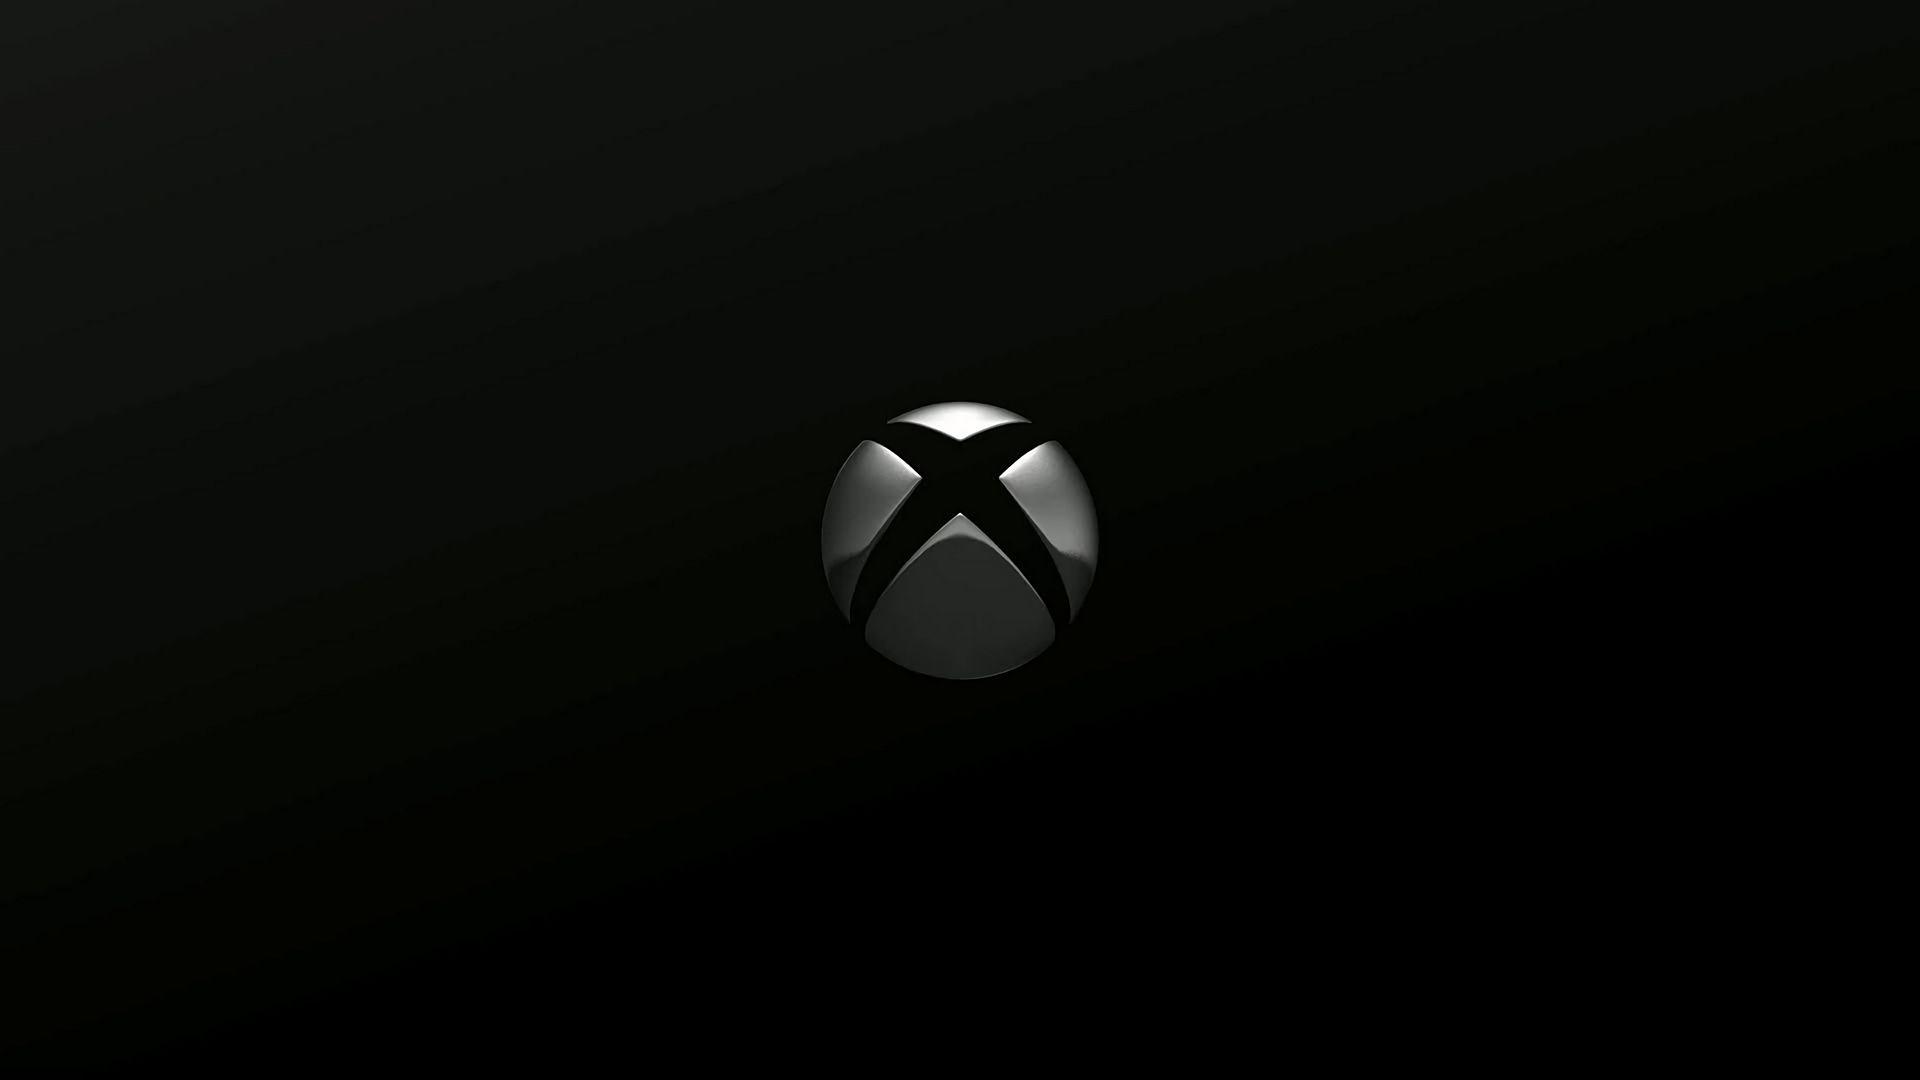 Wallpaper For The Xbox One